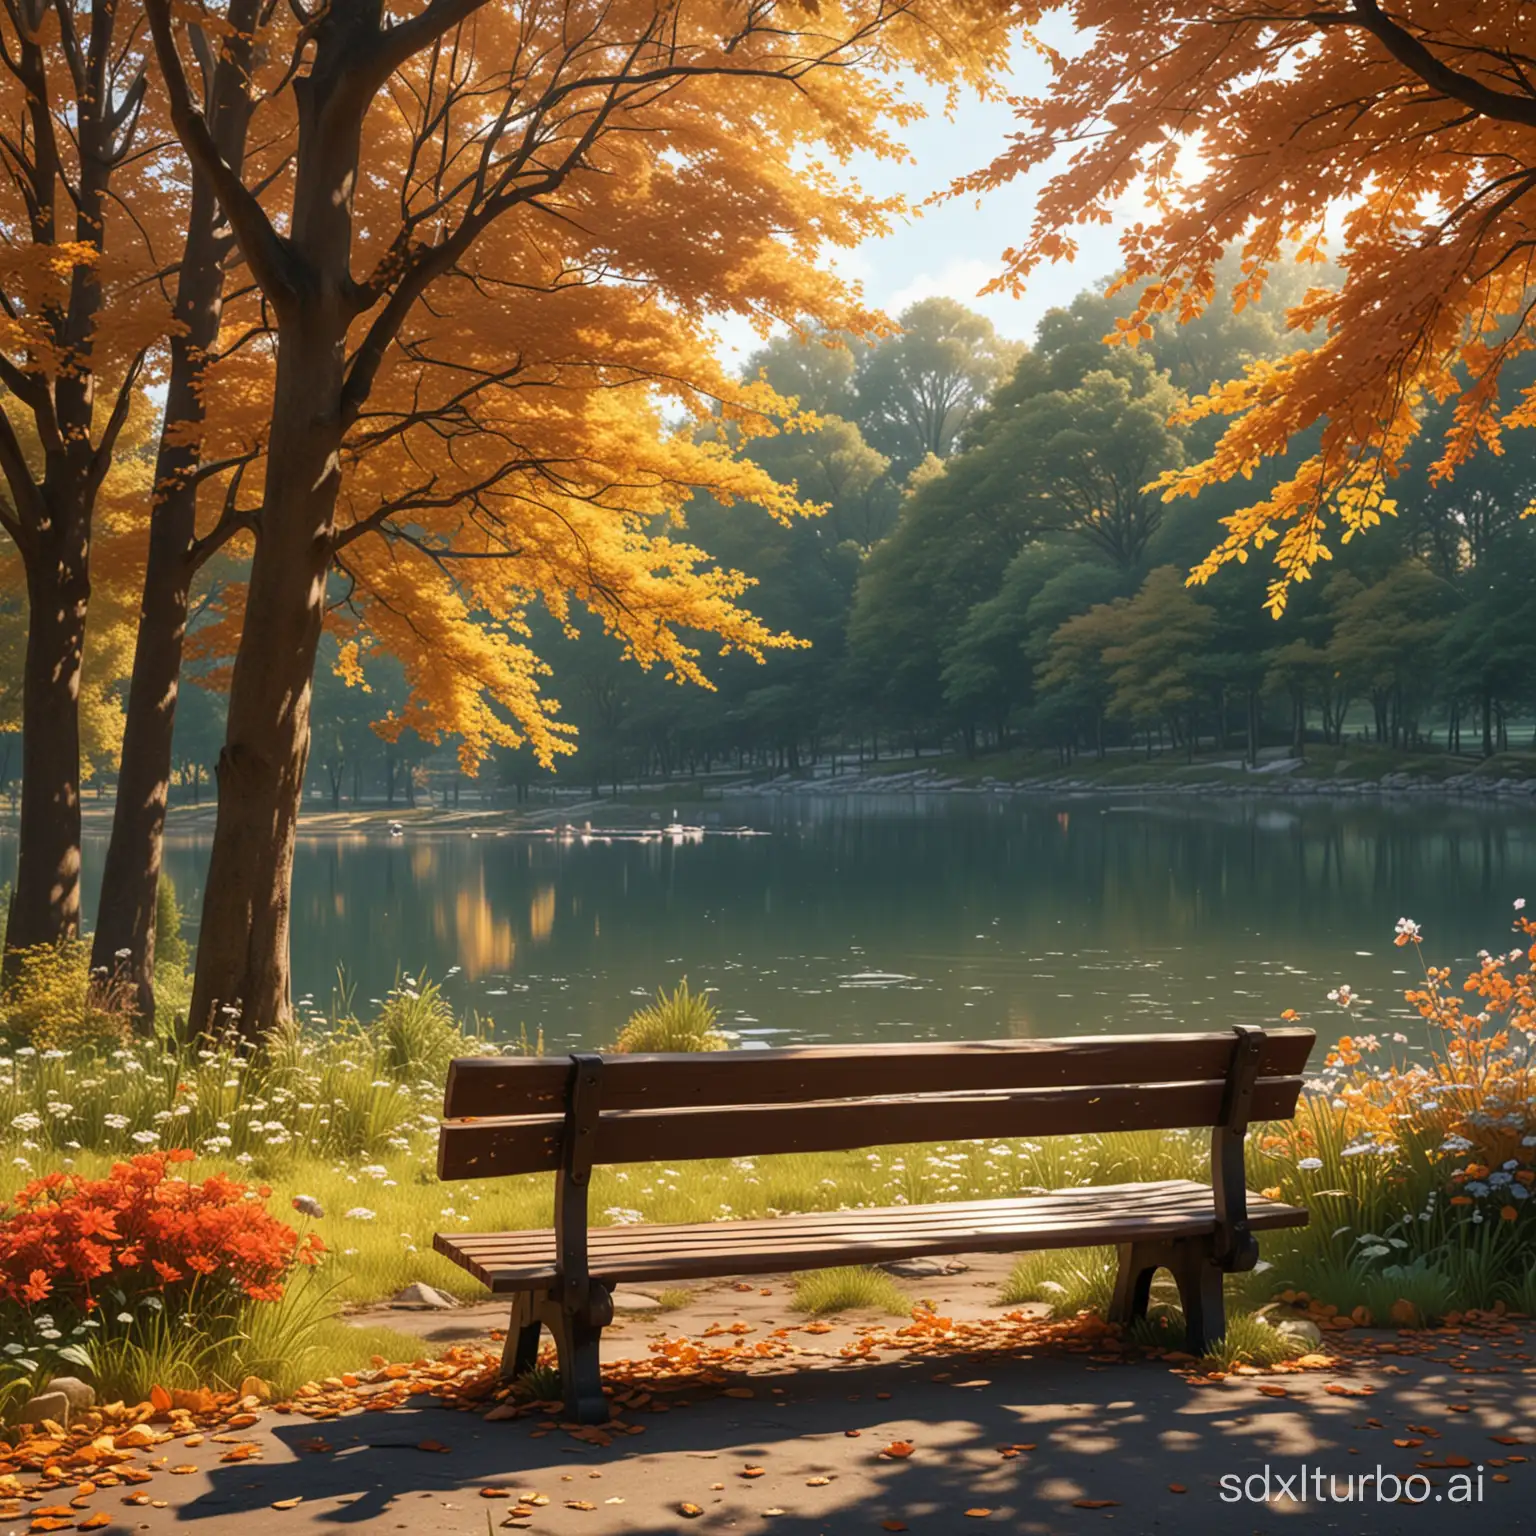 Tranquil-Autumn-Park-Bench-Scene-Serene-Lakeside-Setting-with-Dappled-Light-and-Floral-Accents-8K-Anime-Wallpaper